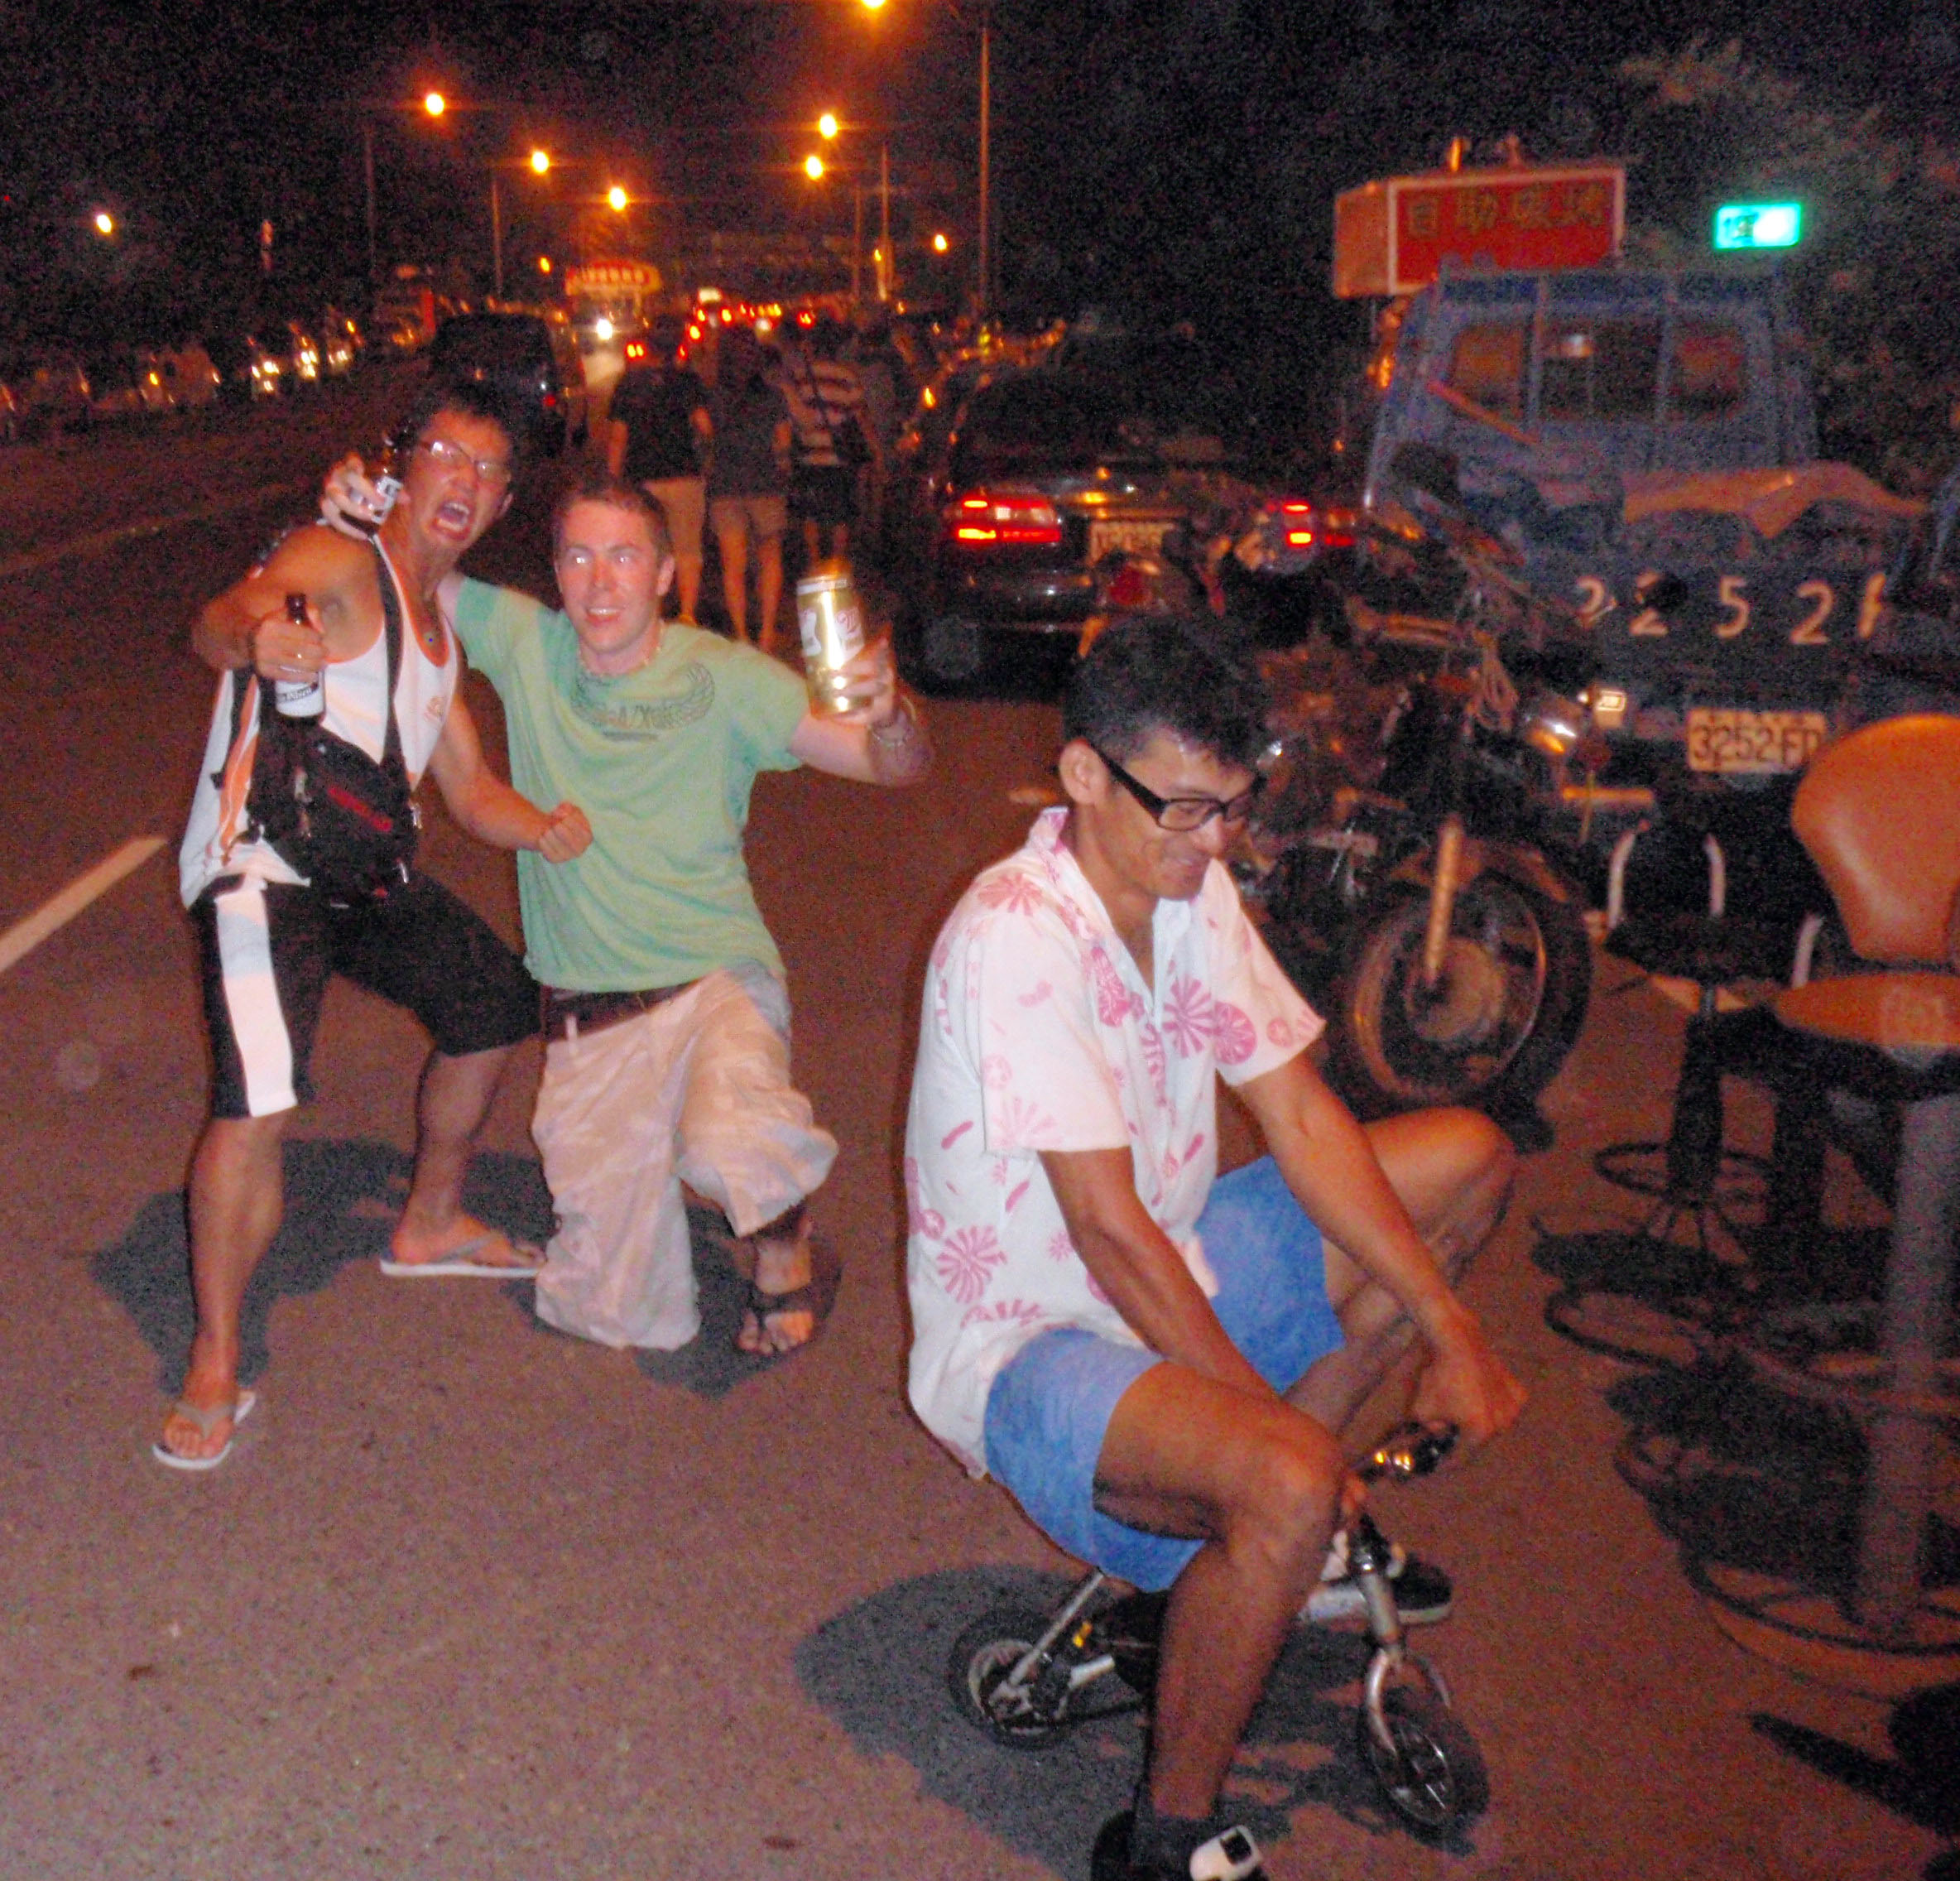 Polfat, Mark and dude on tricycle.jpg